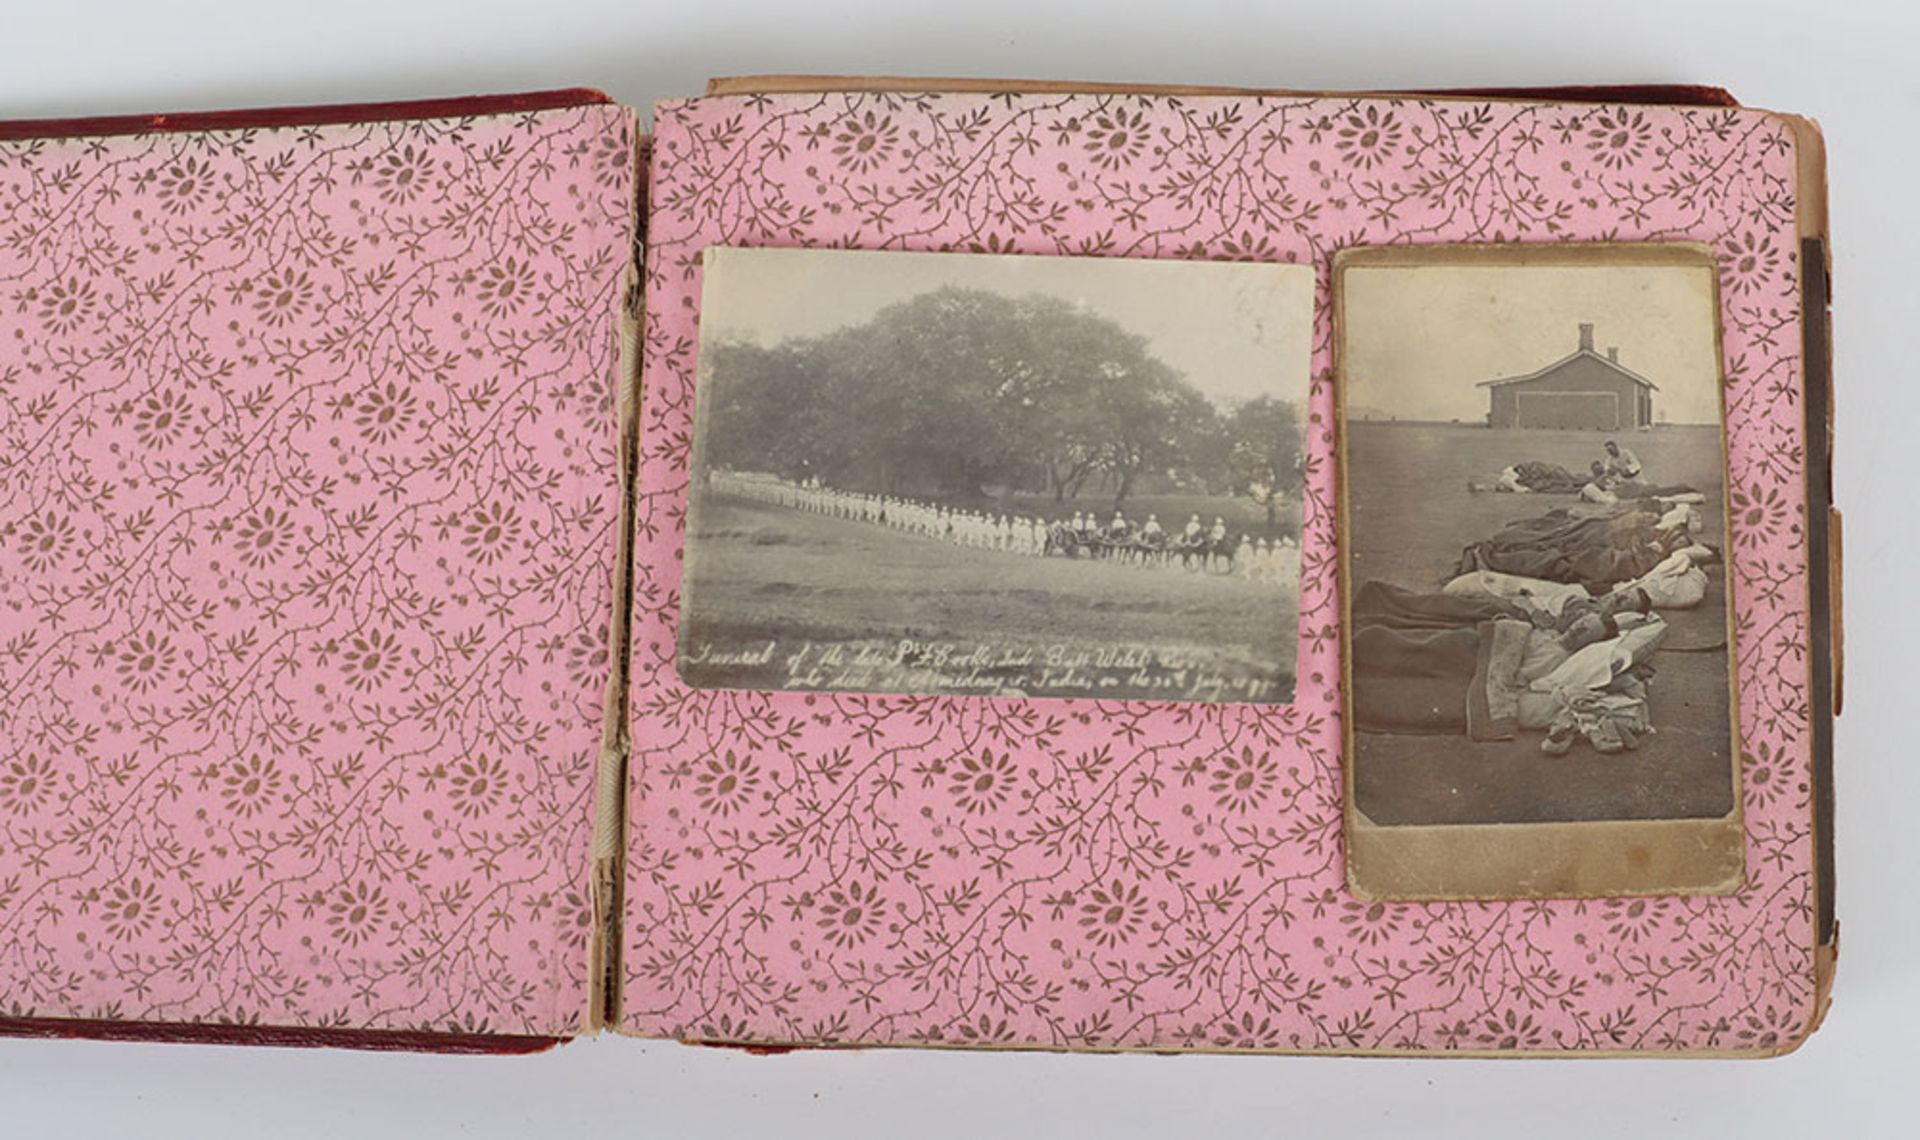 Photograph Album with images of ther Delhi Durbar, troops lining streets, Elephants, sacred cows bel - Image 3 of 48